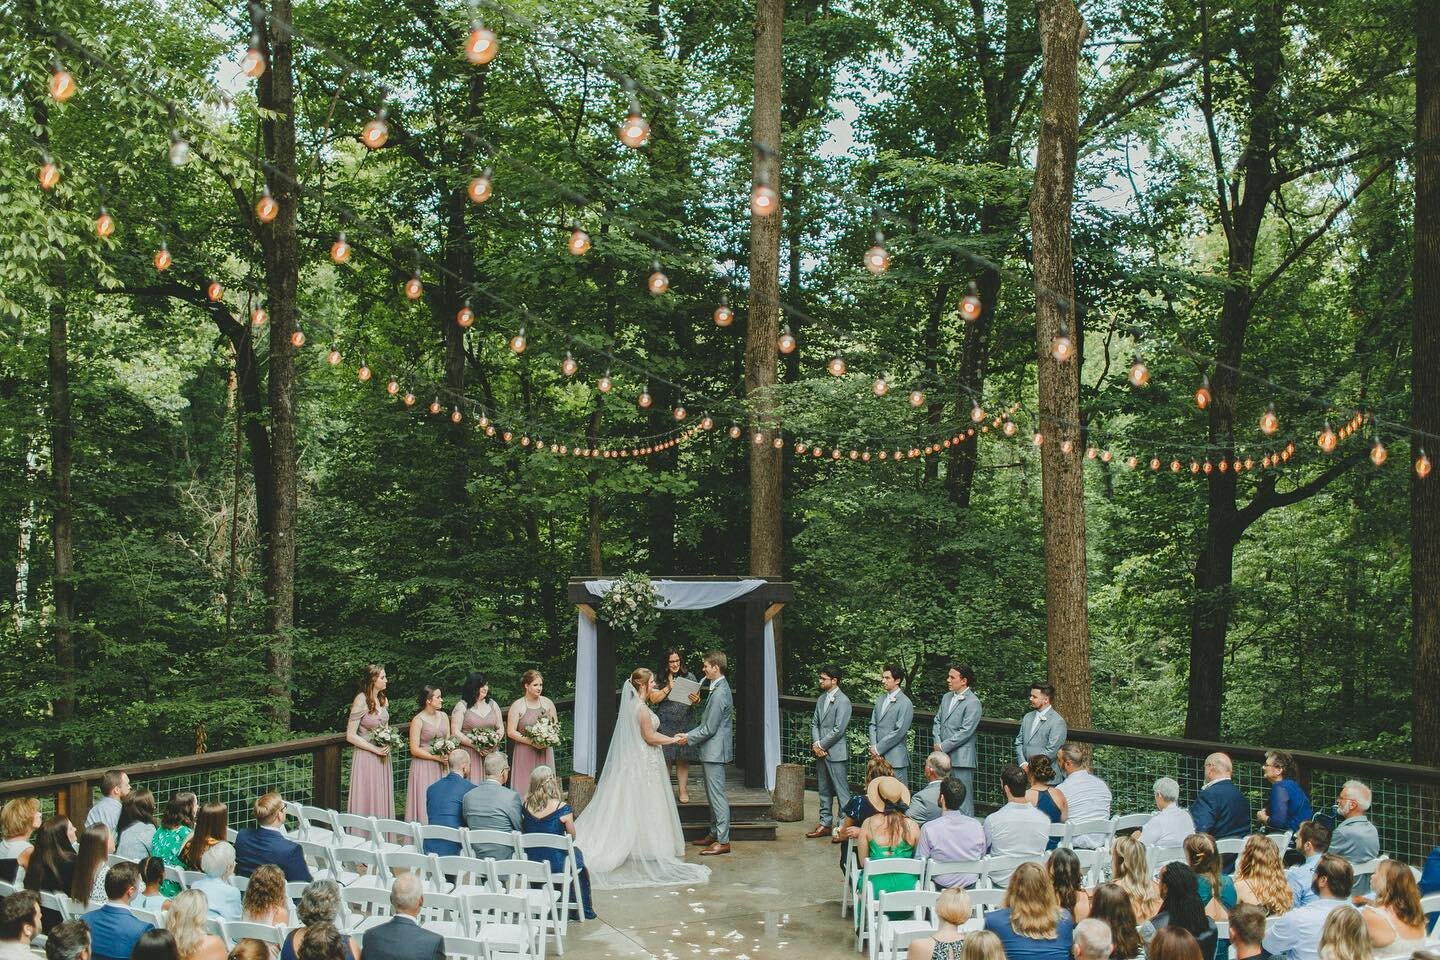 It was our first time shooting at @3fatlabs for Mary Pat &amp; Jamison&rsquo;s big day and all we can say is WOW. This ceremony spot is magical✨